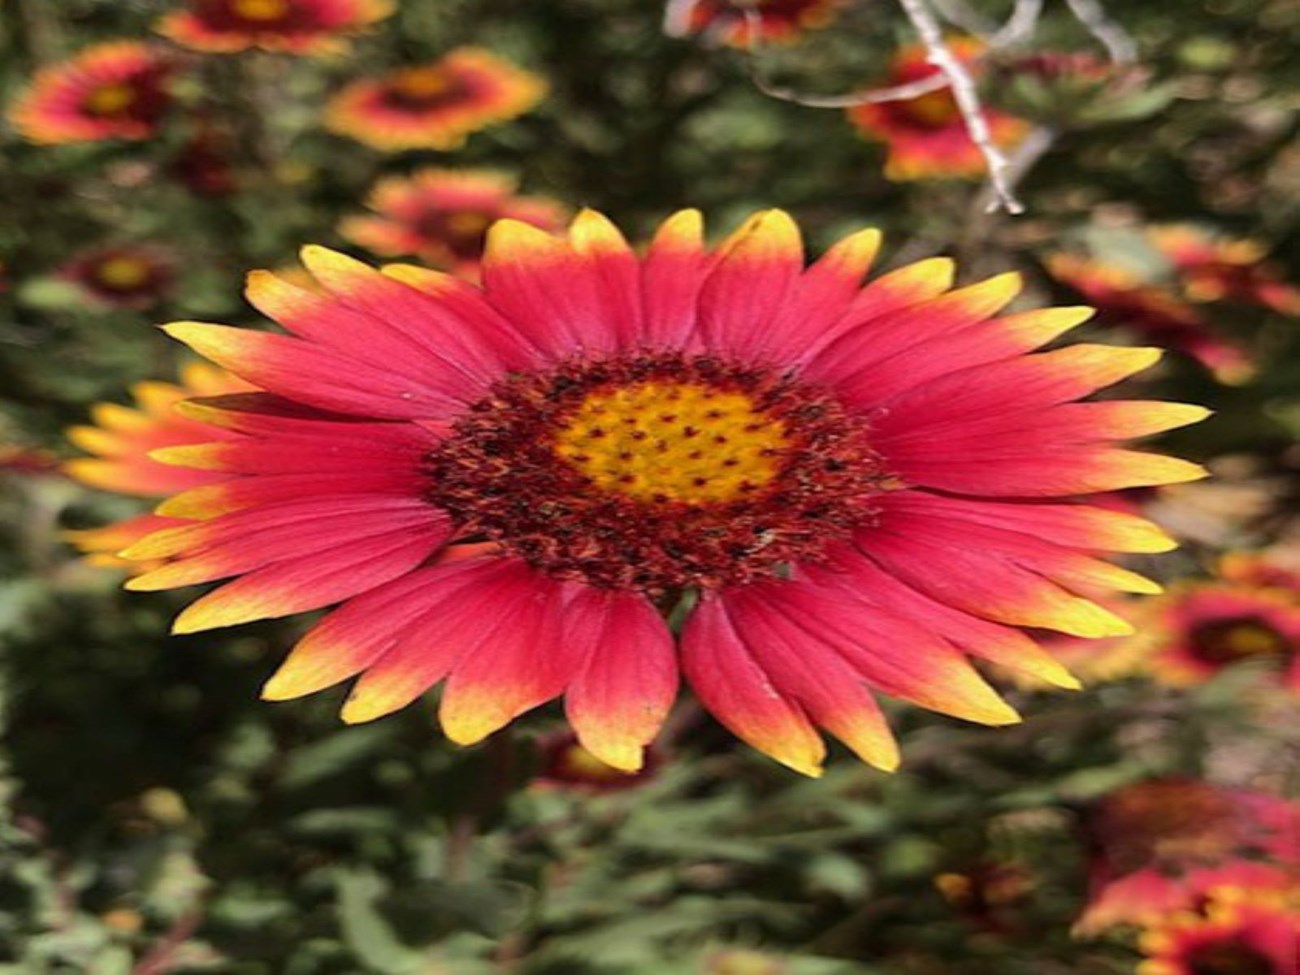 An orange Indian Blanket Flower growing in the garden.  There are yellow centers in the flower.